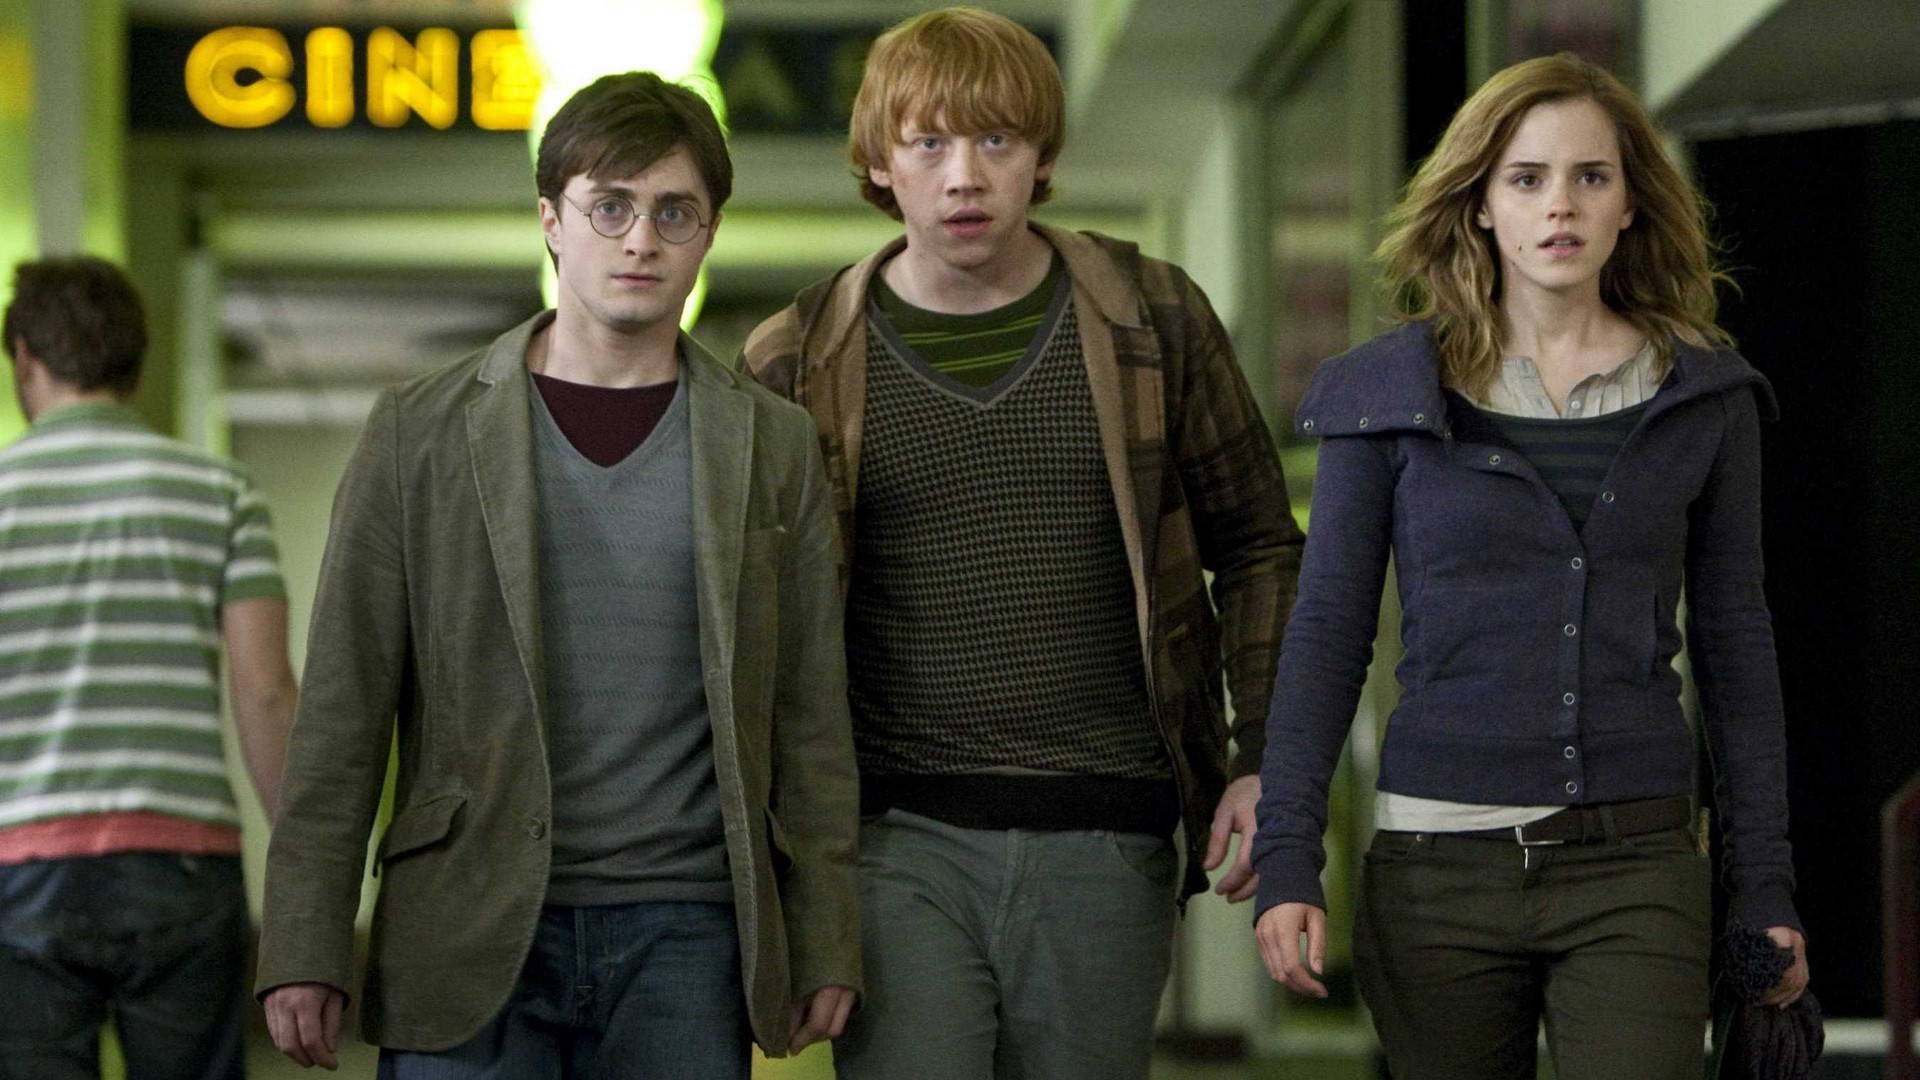 harry potter, movie, harry potter and the deathly hallows: part 1, daniel radcliffe, emma watson, hermione granger, ron weasley, rupert grint cellphone